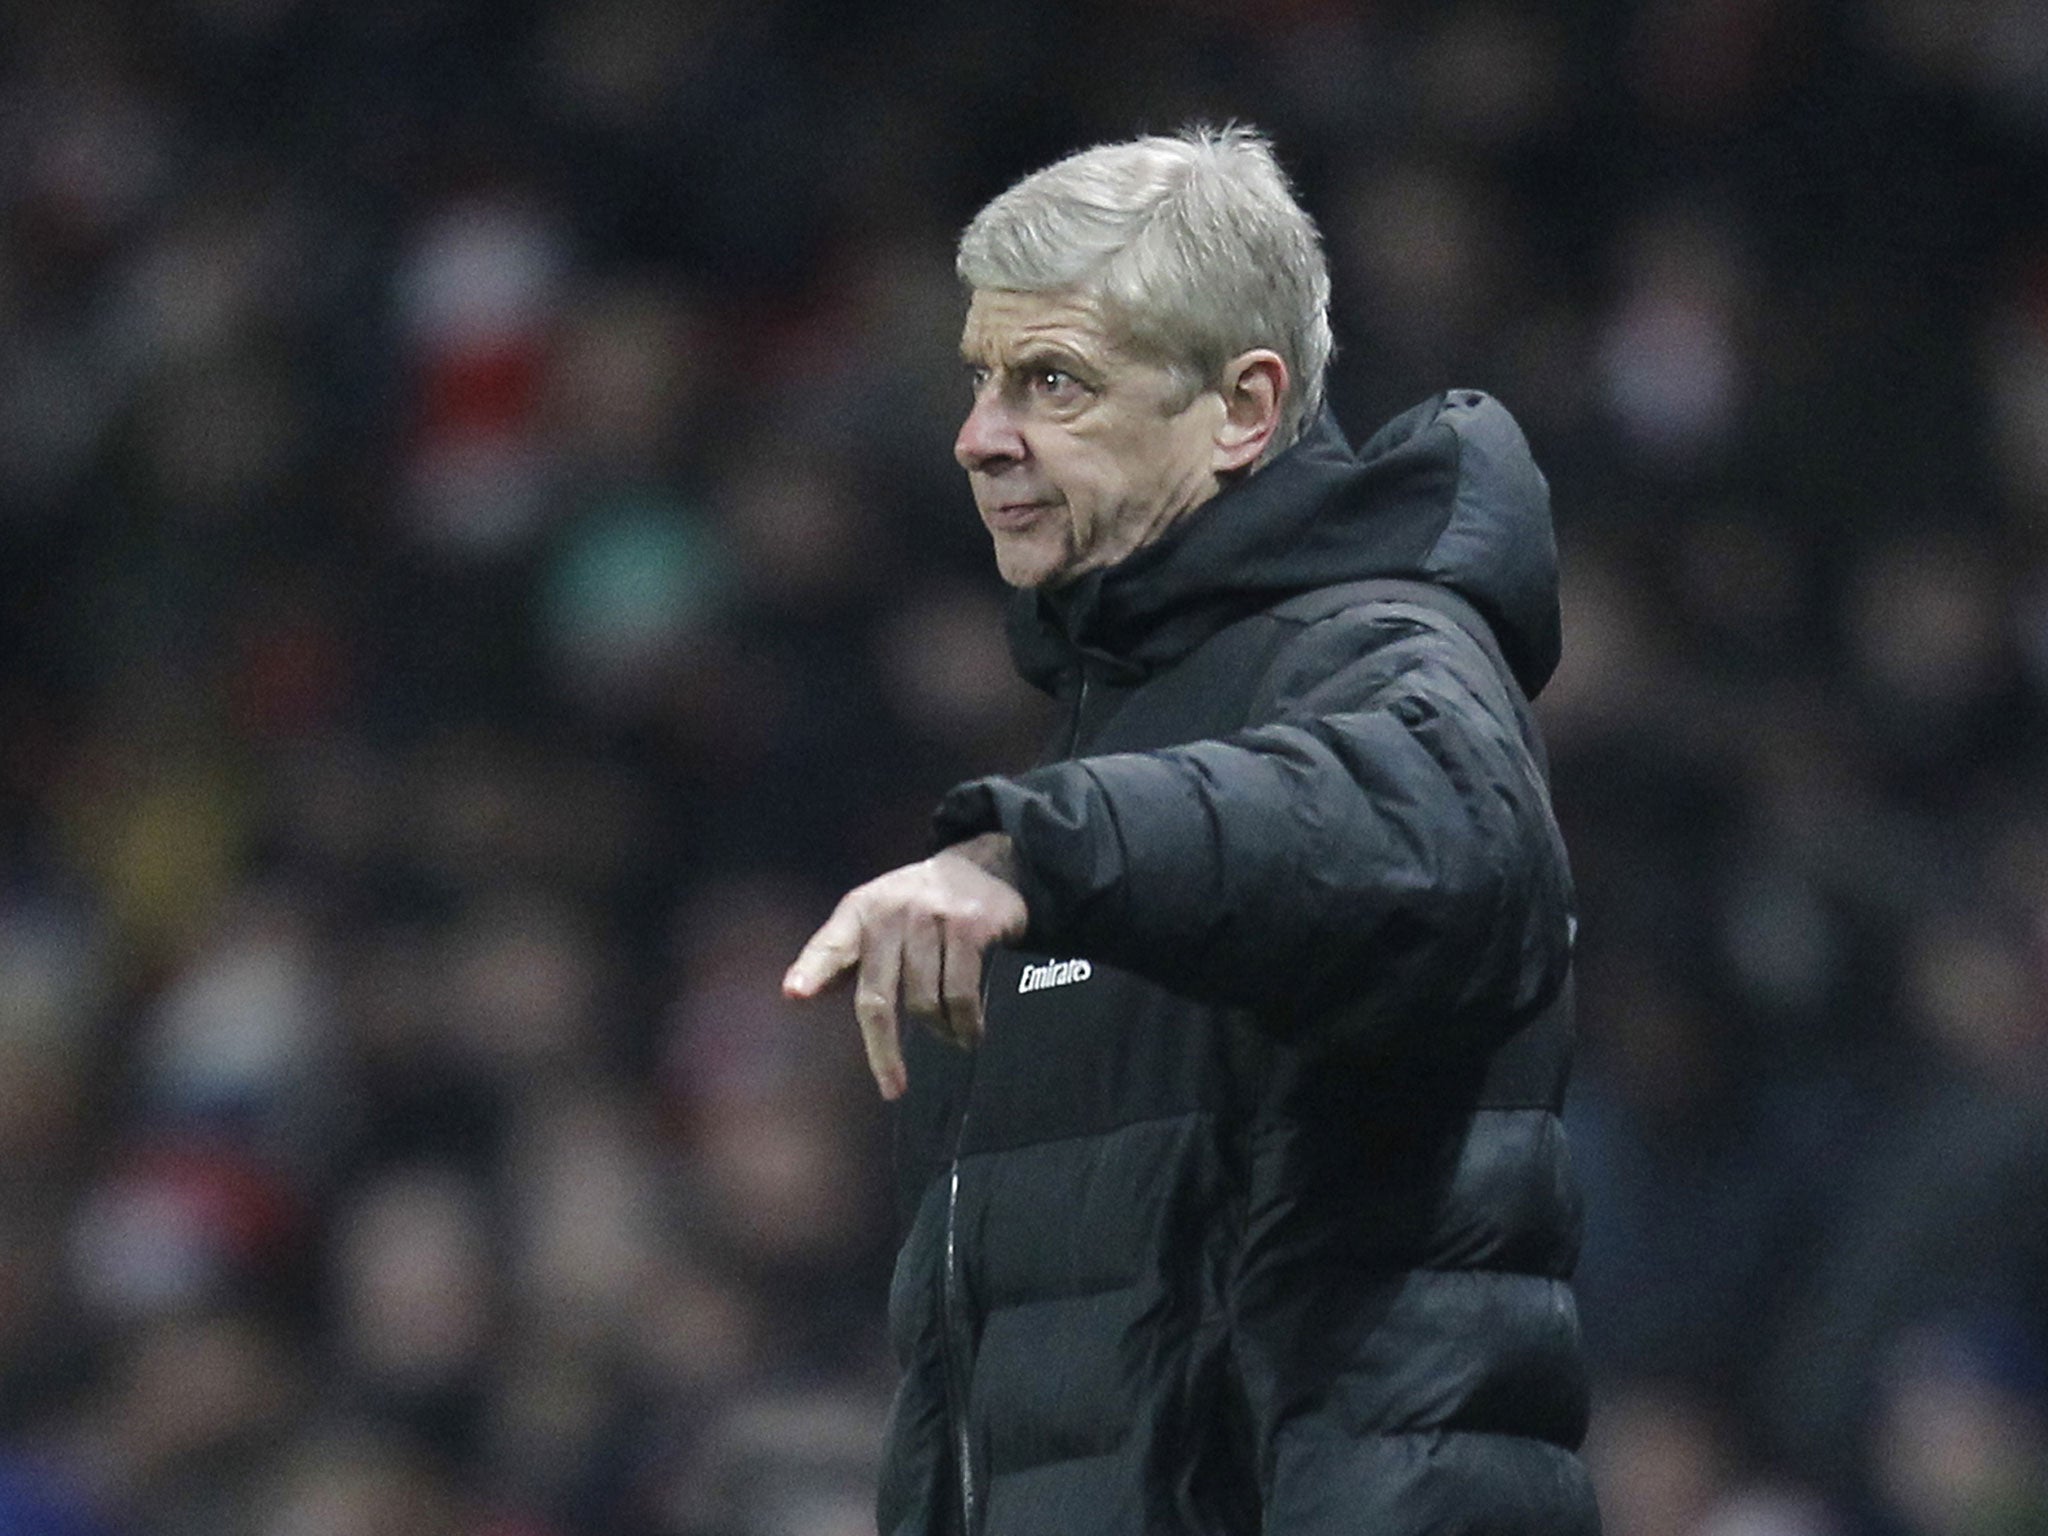 Arsenal's French Manager Arsene Wenger geatures from the touchline